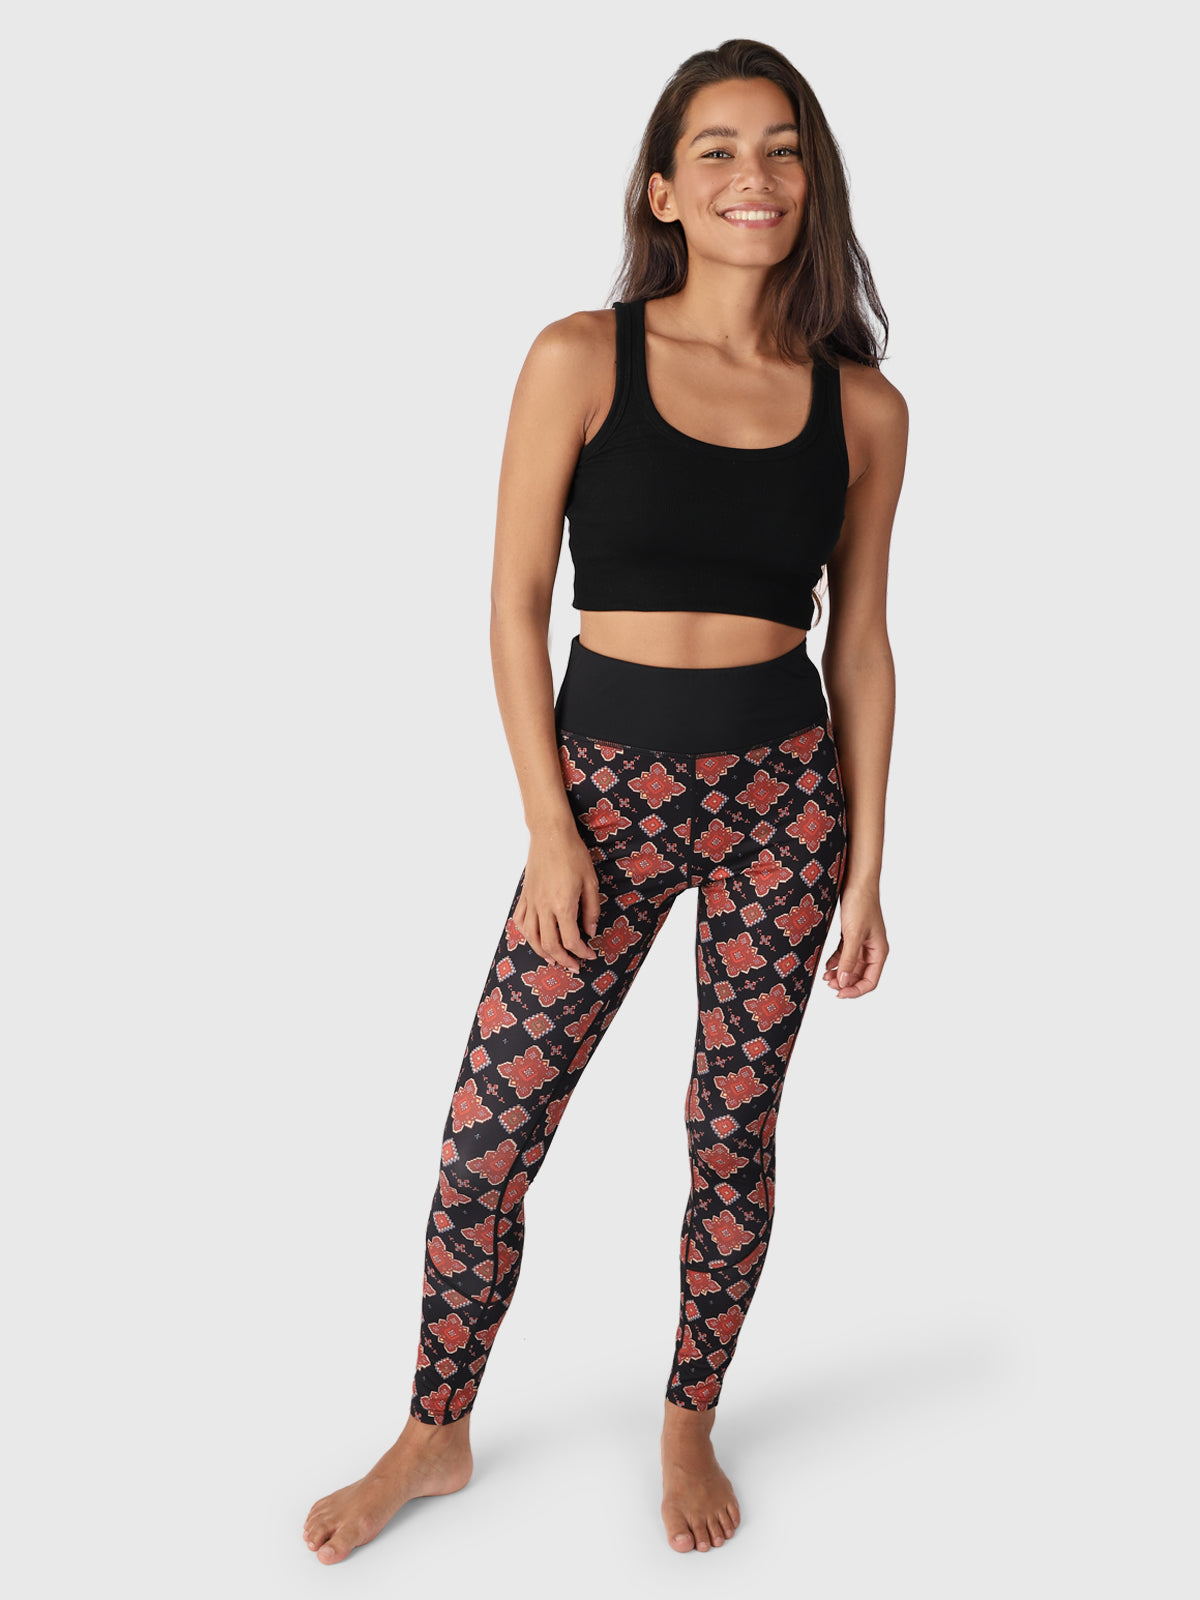 Lolly-AO Women Thermal Pants